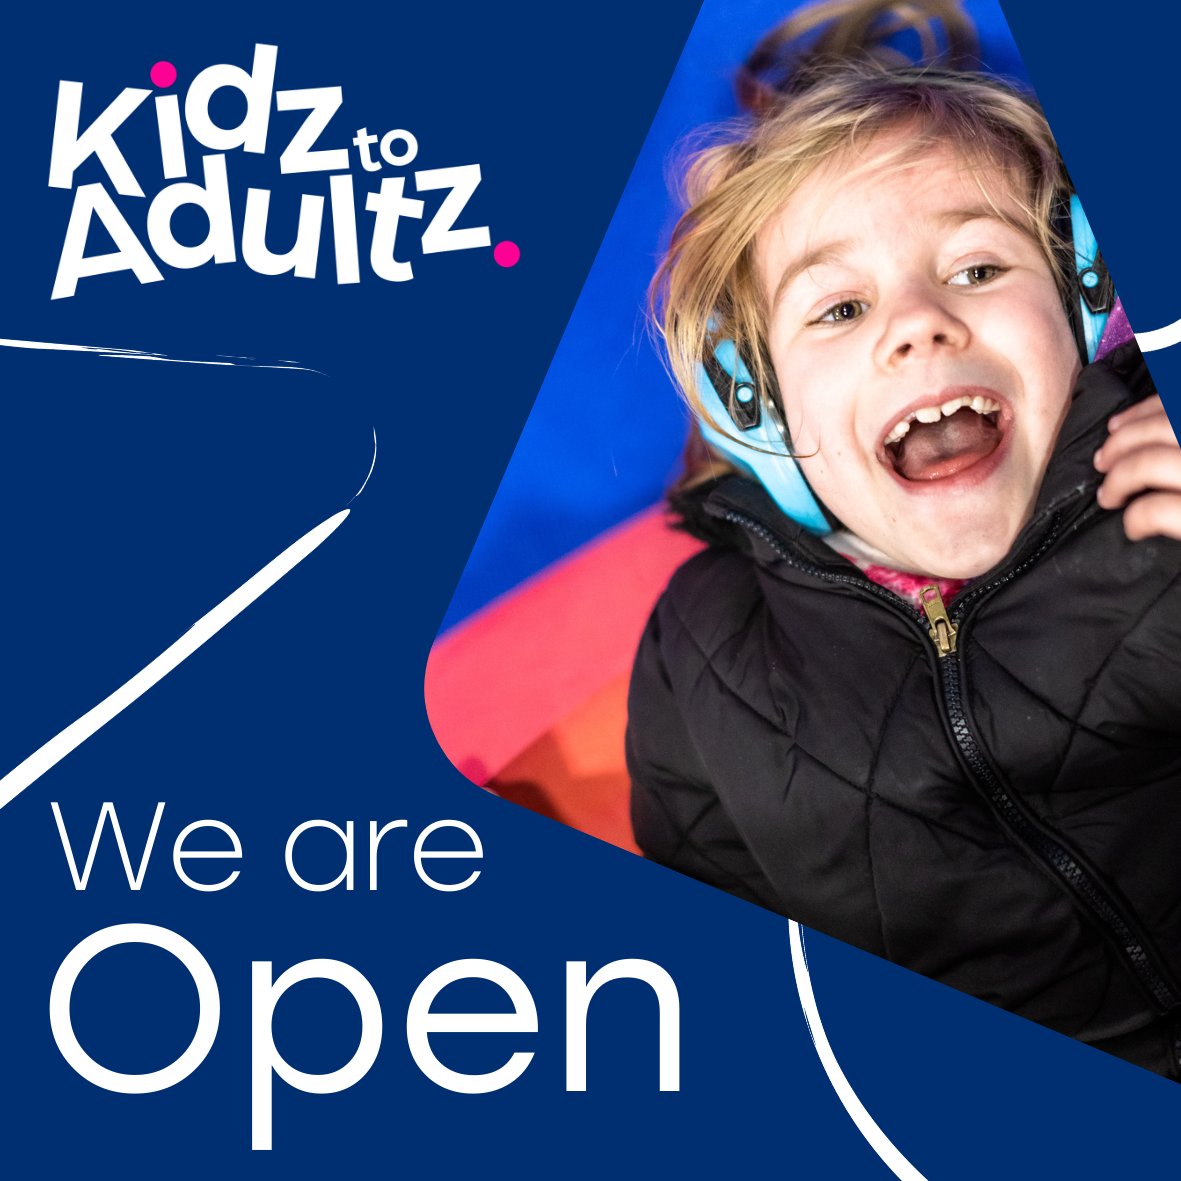 Hello Farnborough! 👋 Our doors are officially open at Kidz to Adultz South! The exhibitors are all set up, and the team are in reception waiting to greet you. We hope you have an informative and fun day! 📍 @farnborough_int #kidztoadultz #farnborough #disabilites #exhibition